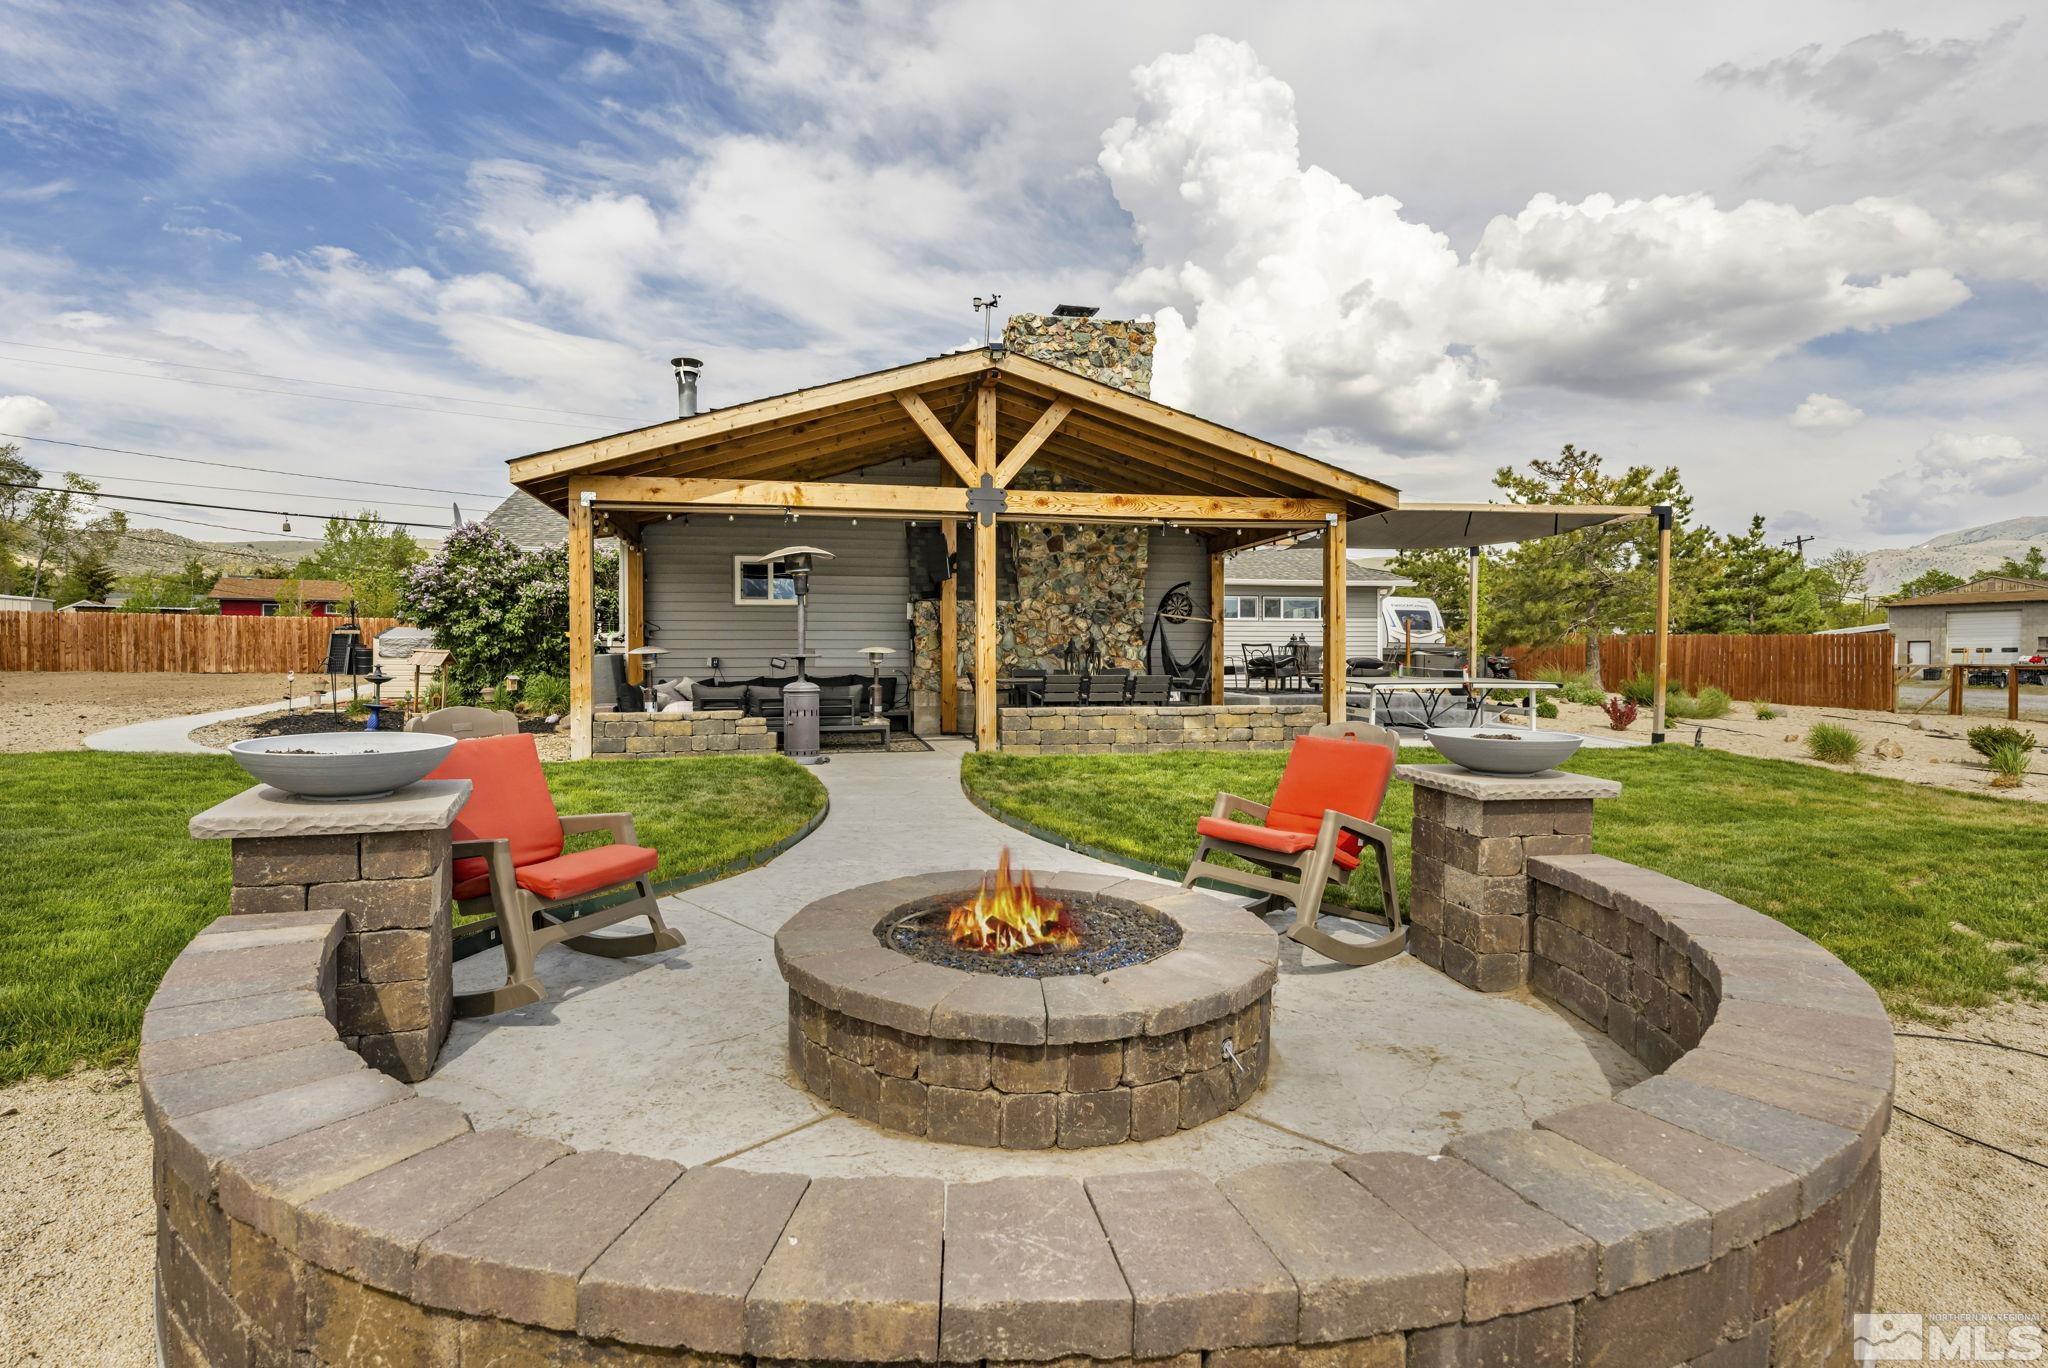 a view of a backyard with sitting area and fire pit